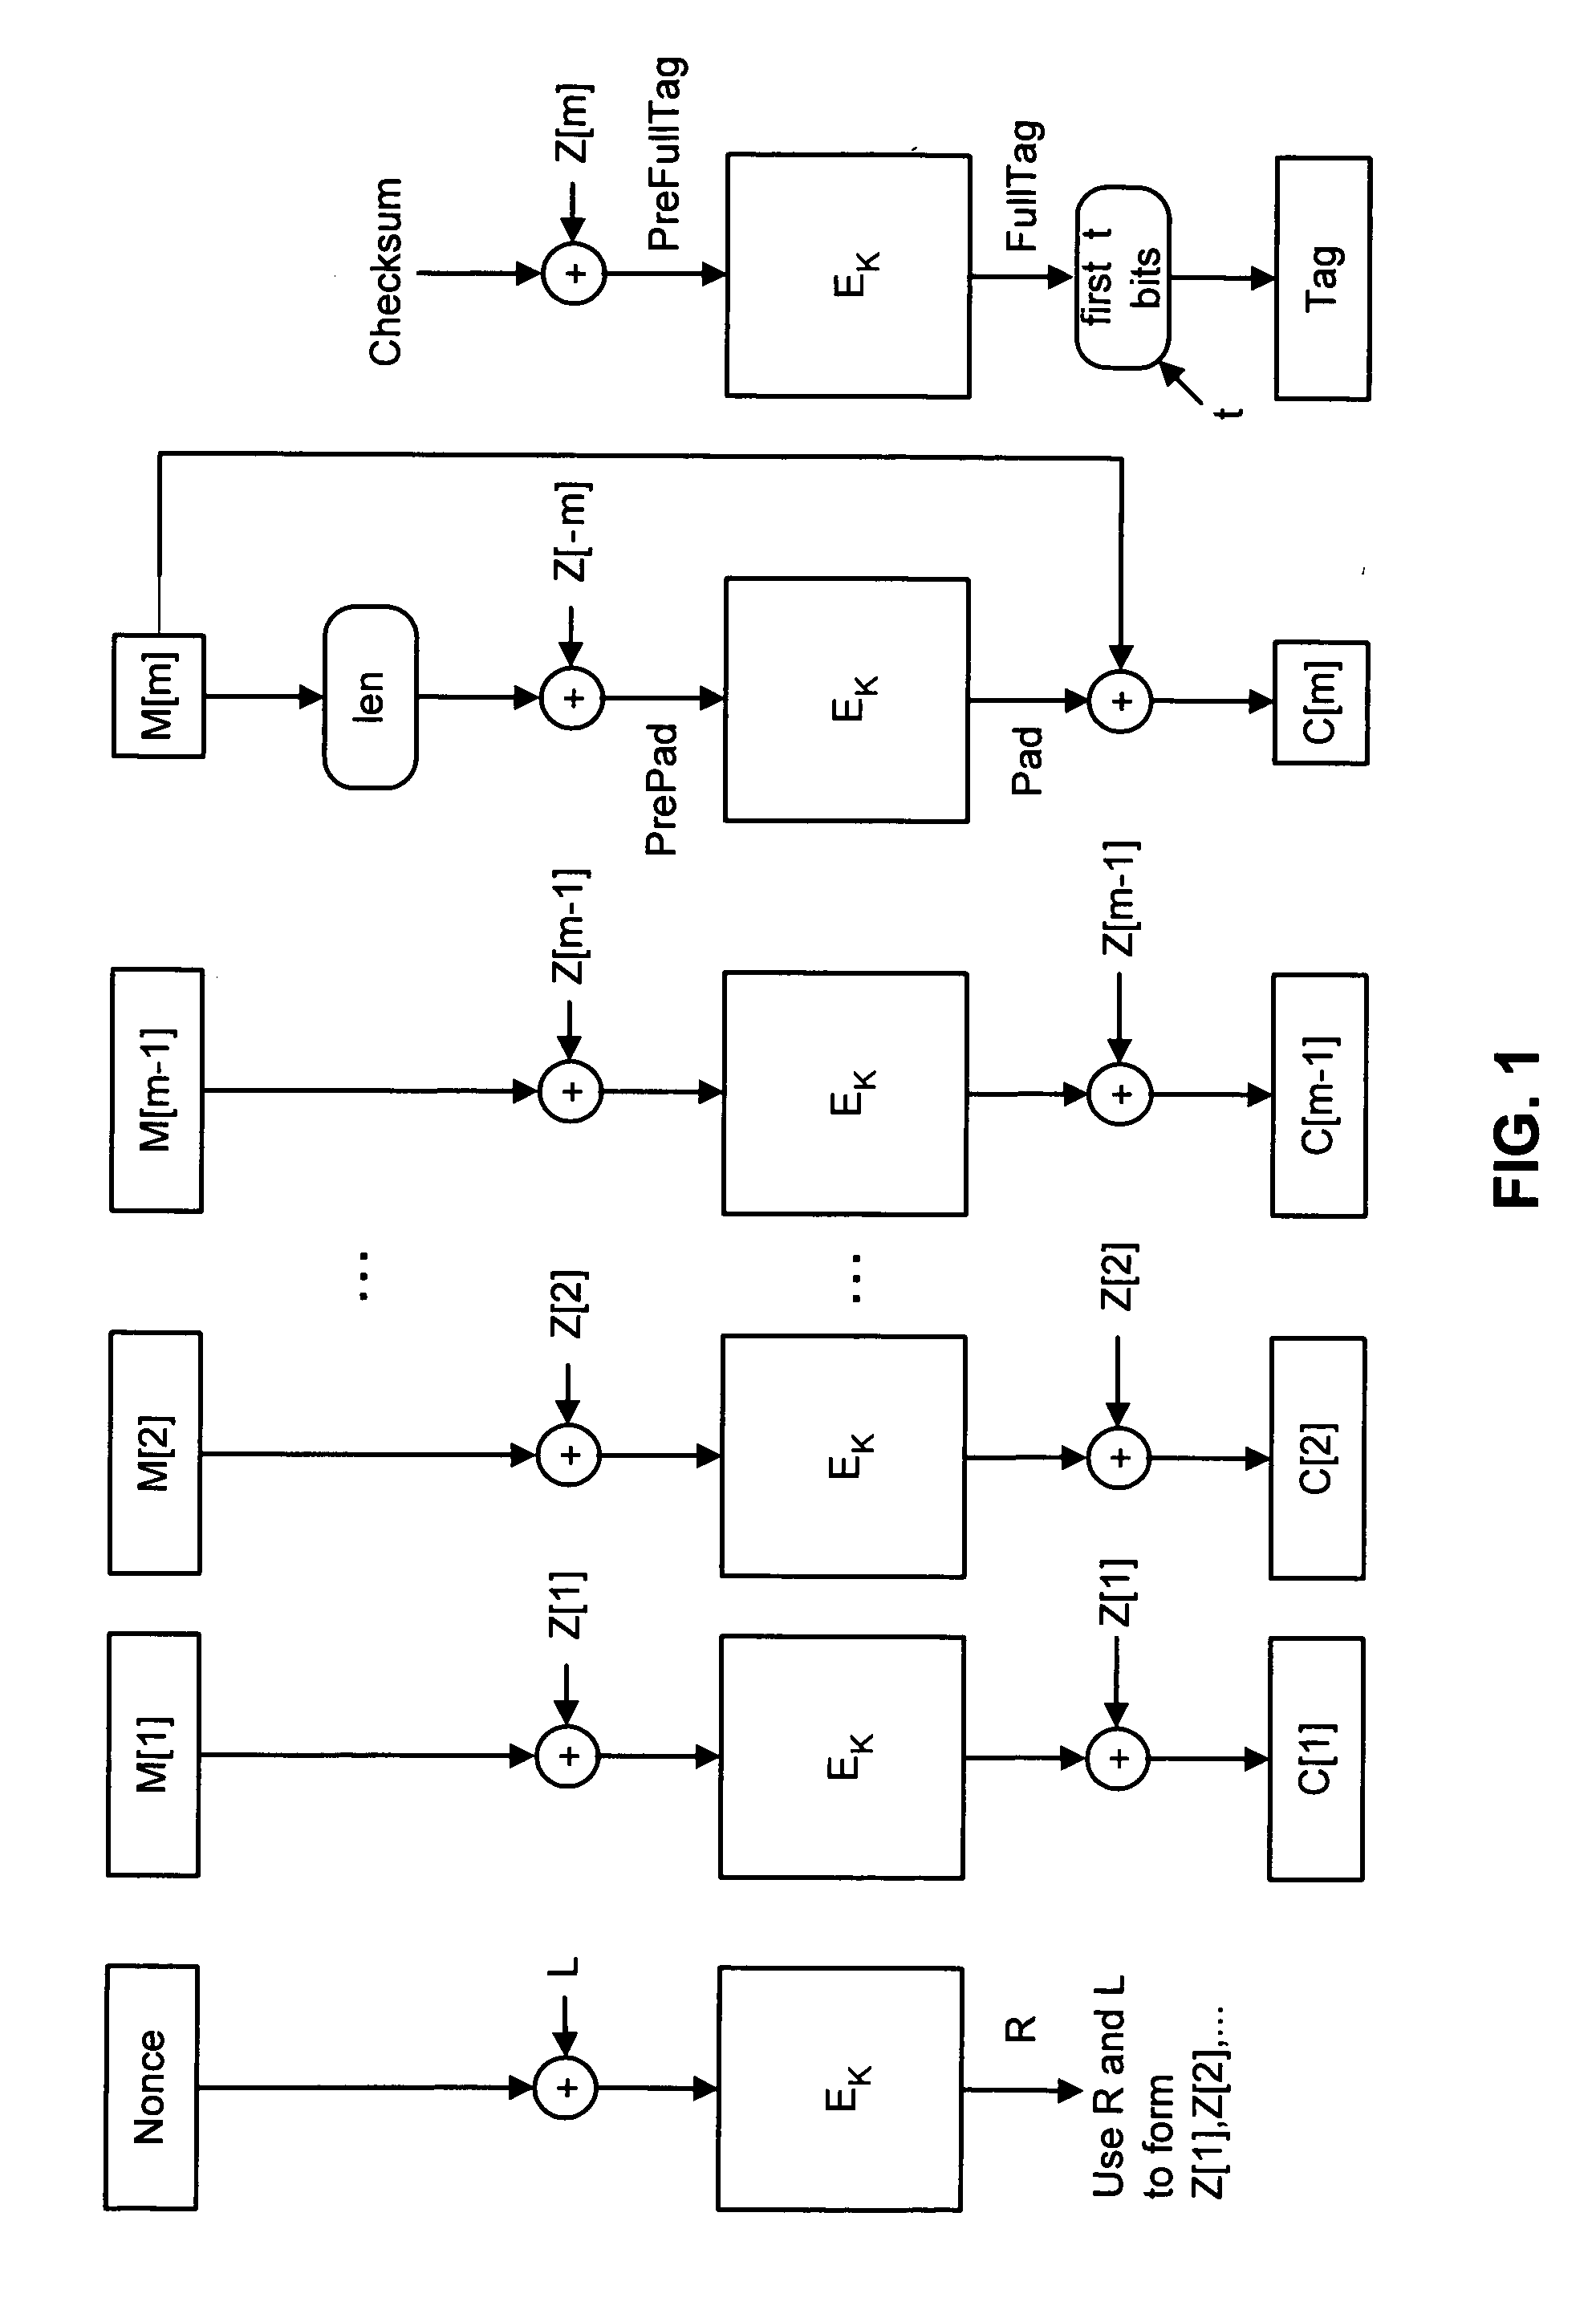 Method and apparatus for facilitating efficient authenticated encryption